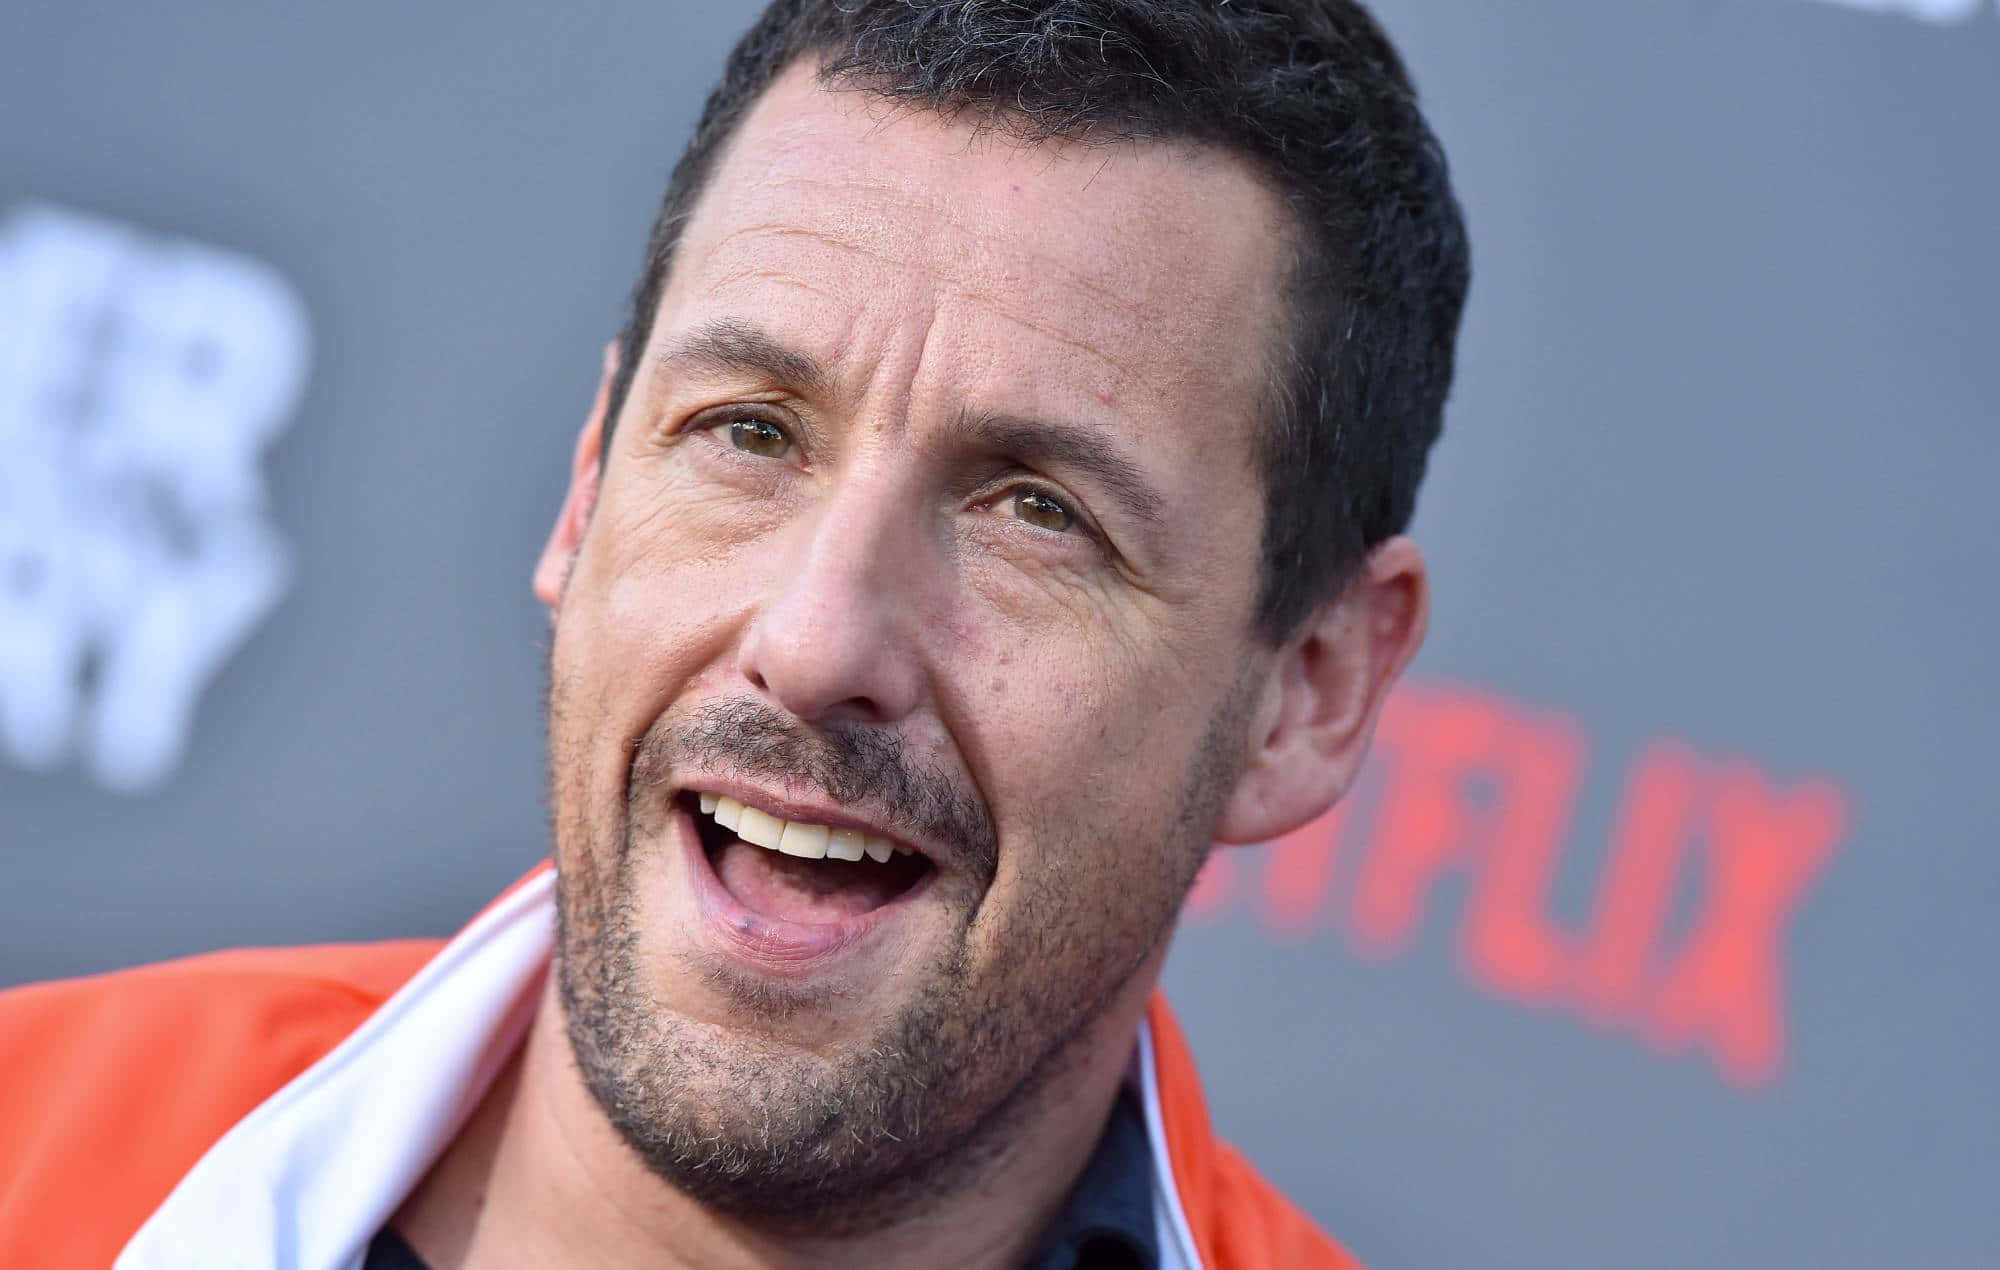 Download Adam Sandler on a Sunny Day | Wallpapers.com